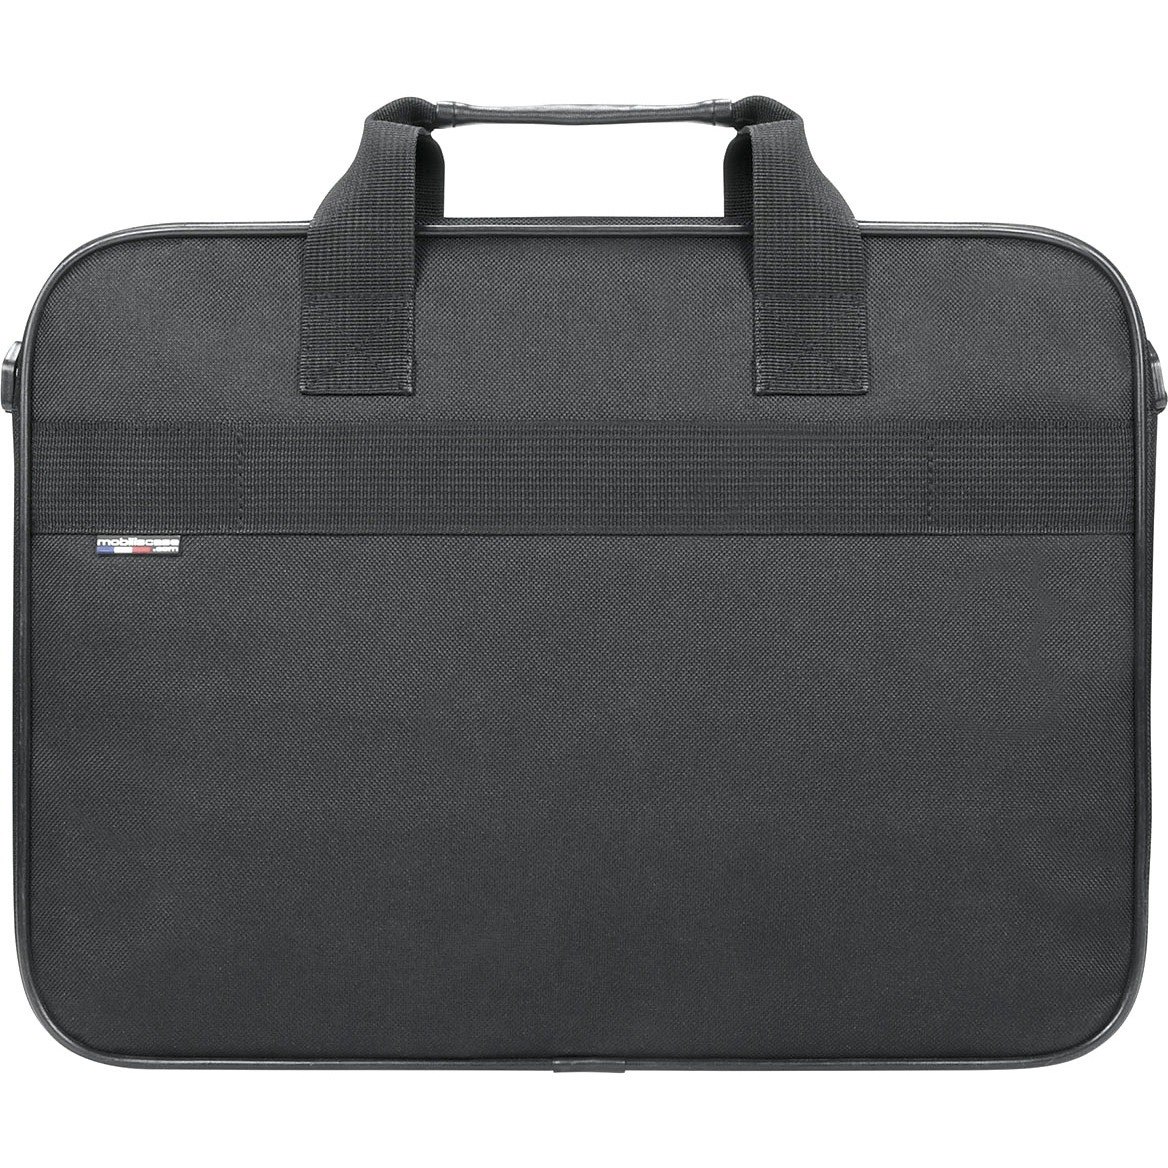 MOBILIS Executive Carrying Case (Briefcase) for 27.9 cm (11") to 35.6 cm (14") Notebook - Navy Blue, Black